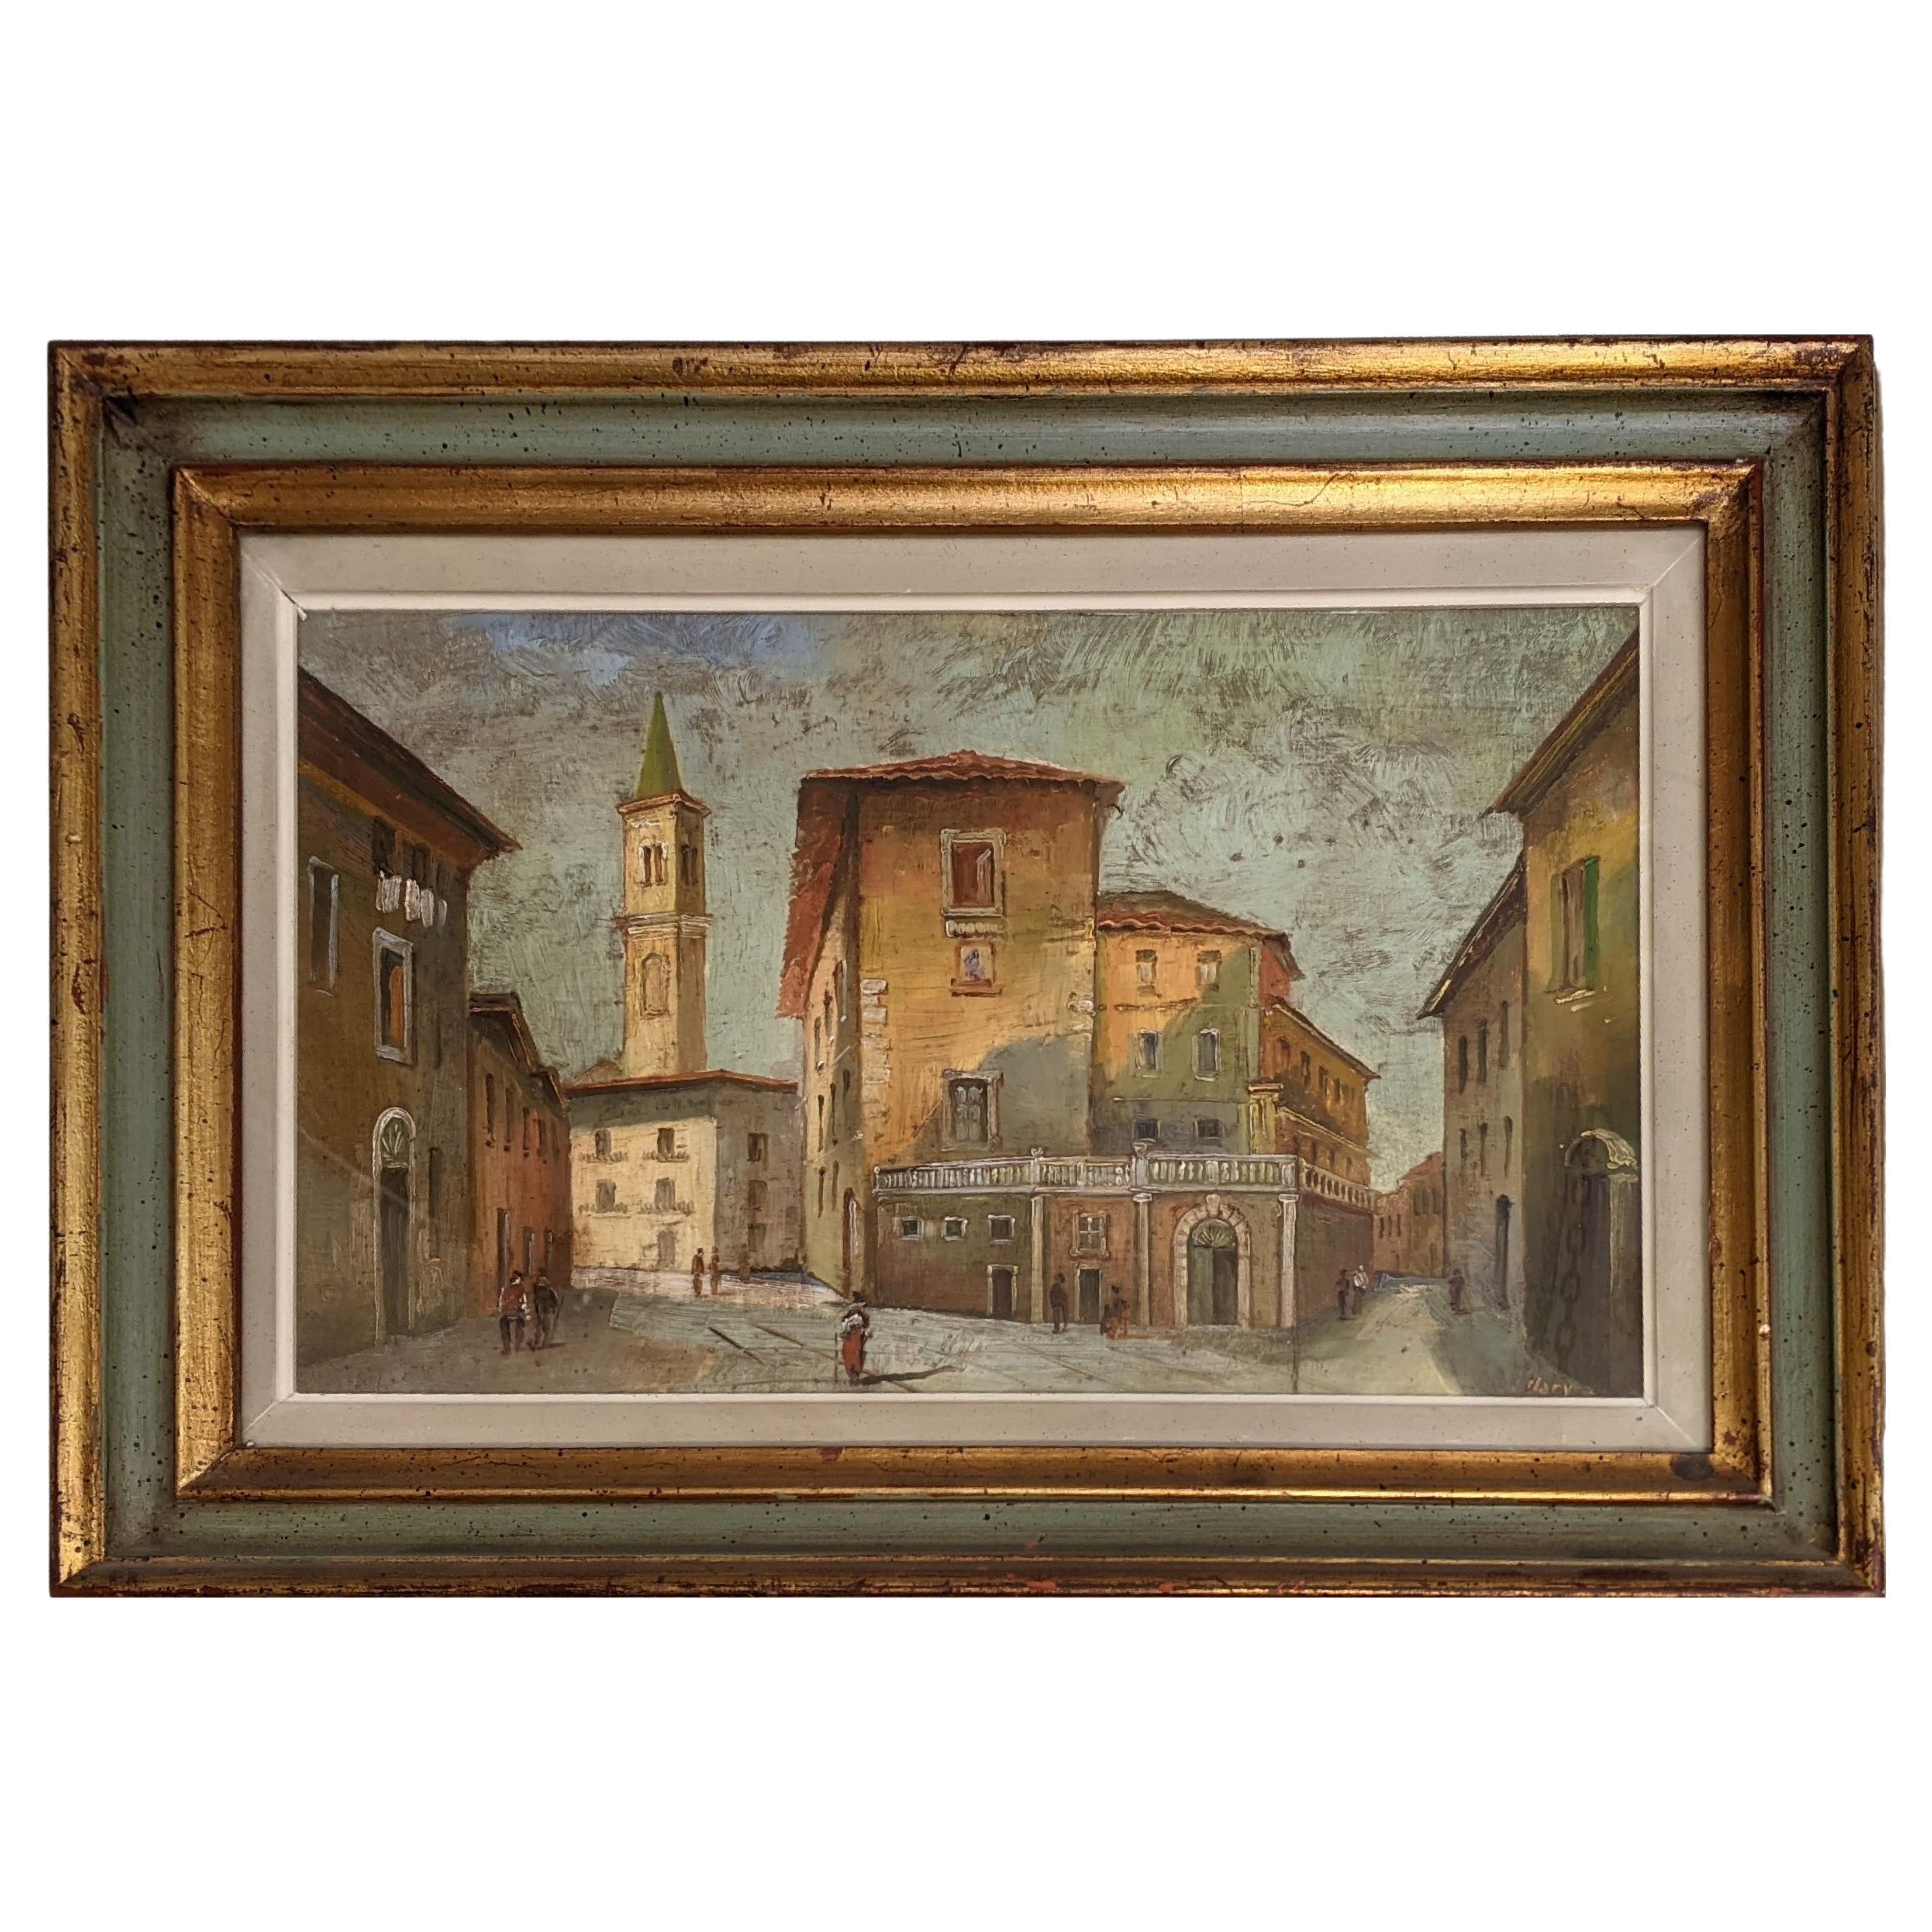 Urban Landscape, Oil on Panel, Early 1900s